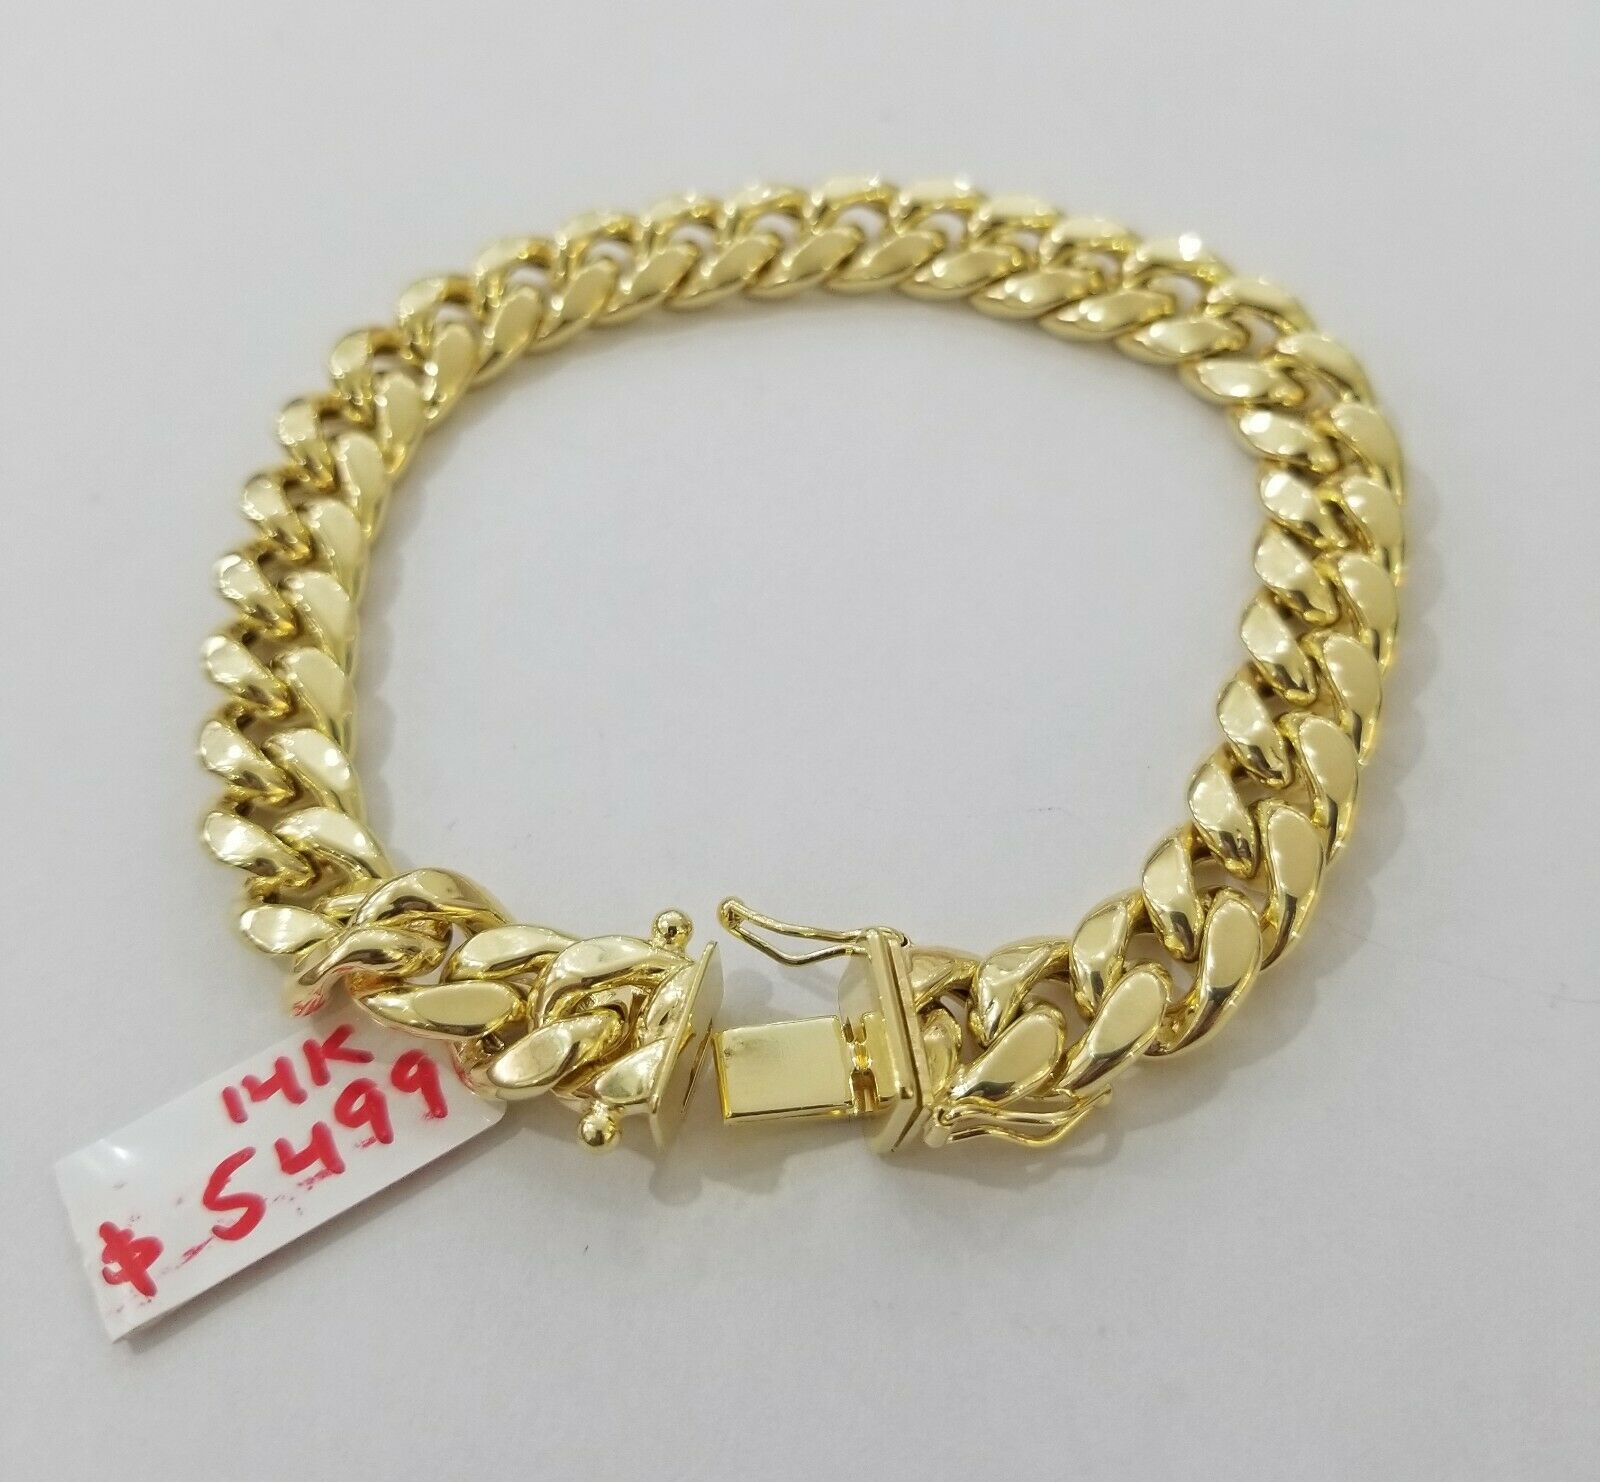 REAL GOLD Bracelet 14KT Miami Cuban Link 8" 9mm Box Clasp Yellow 14kt Gold MENS